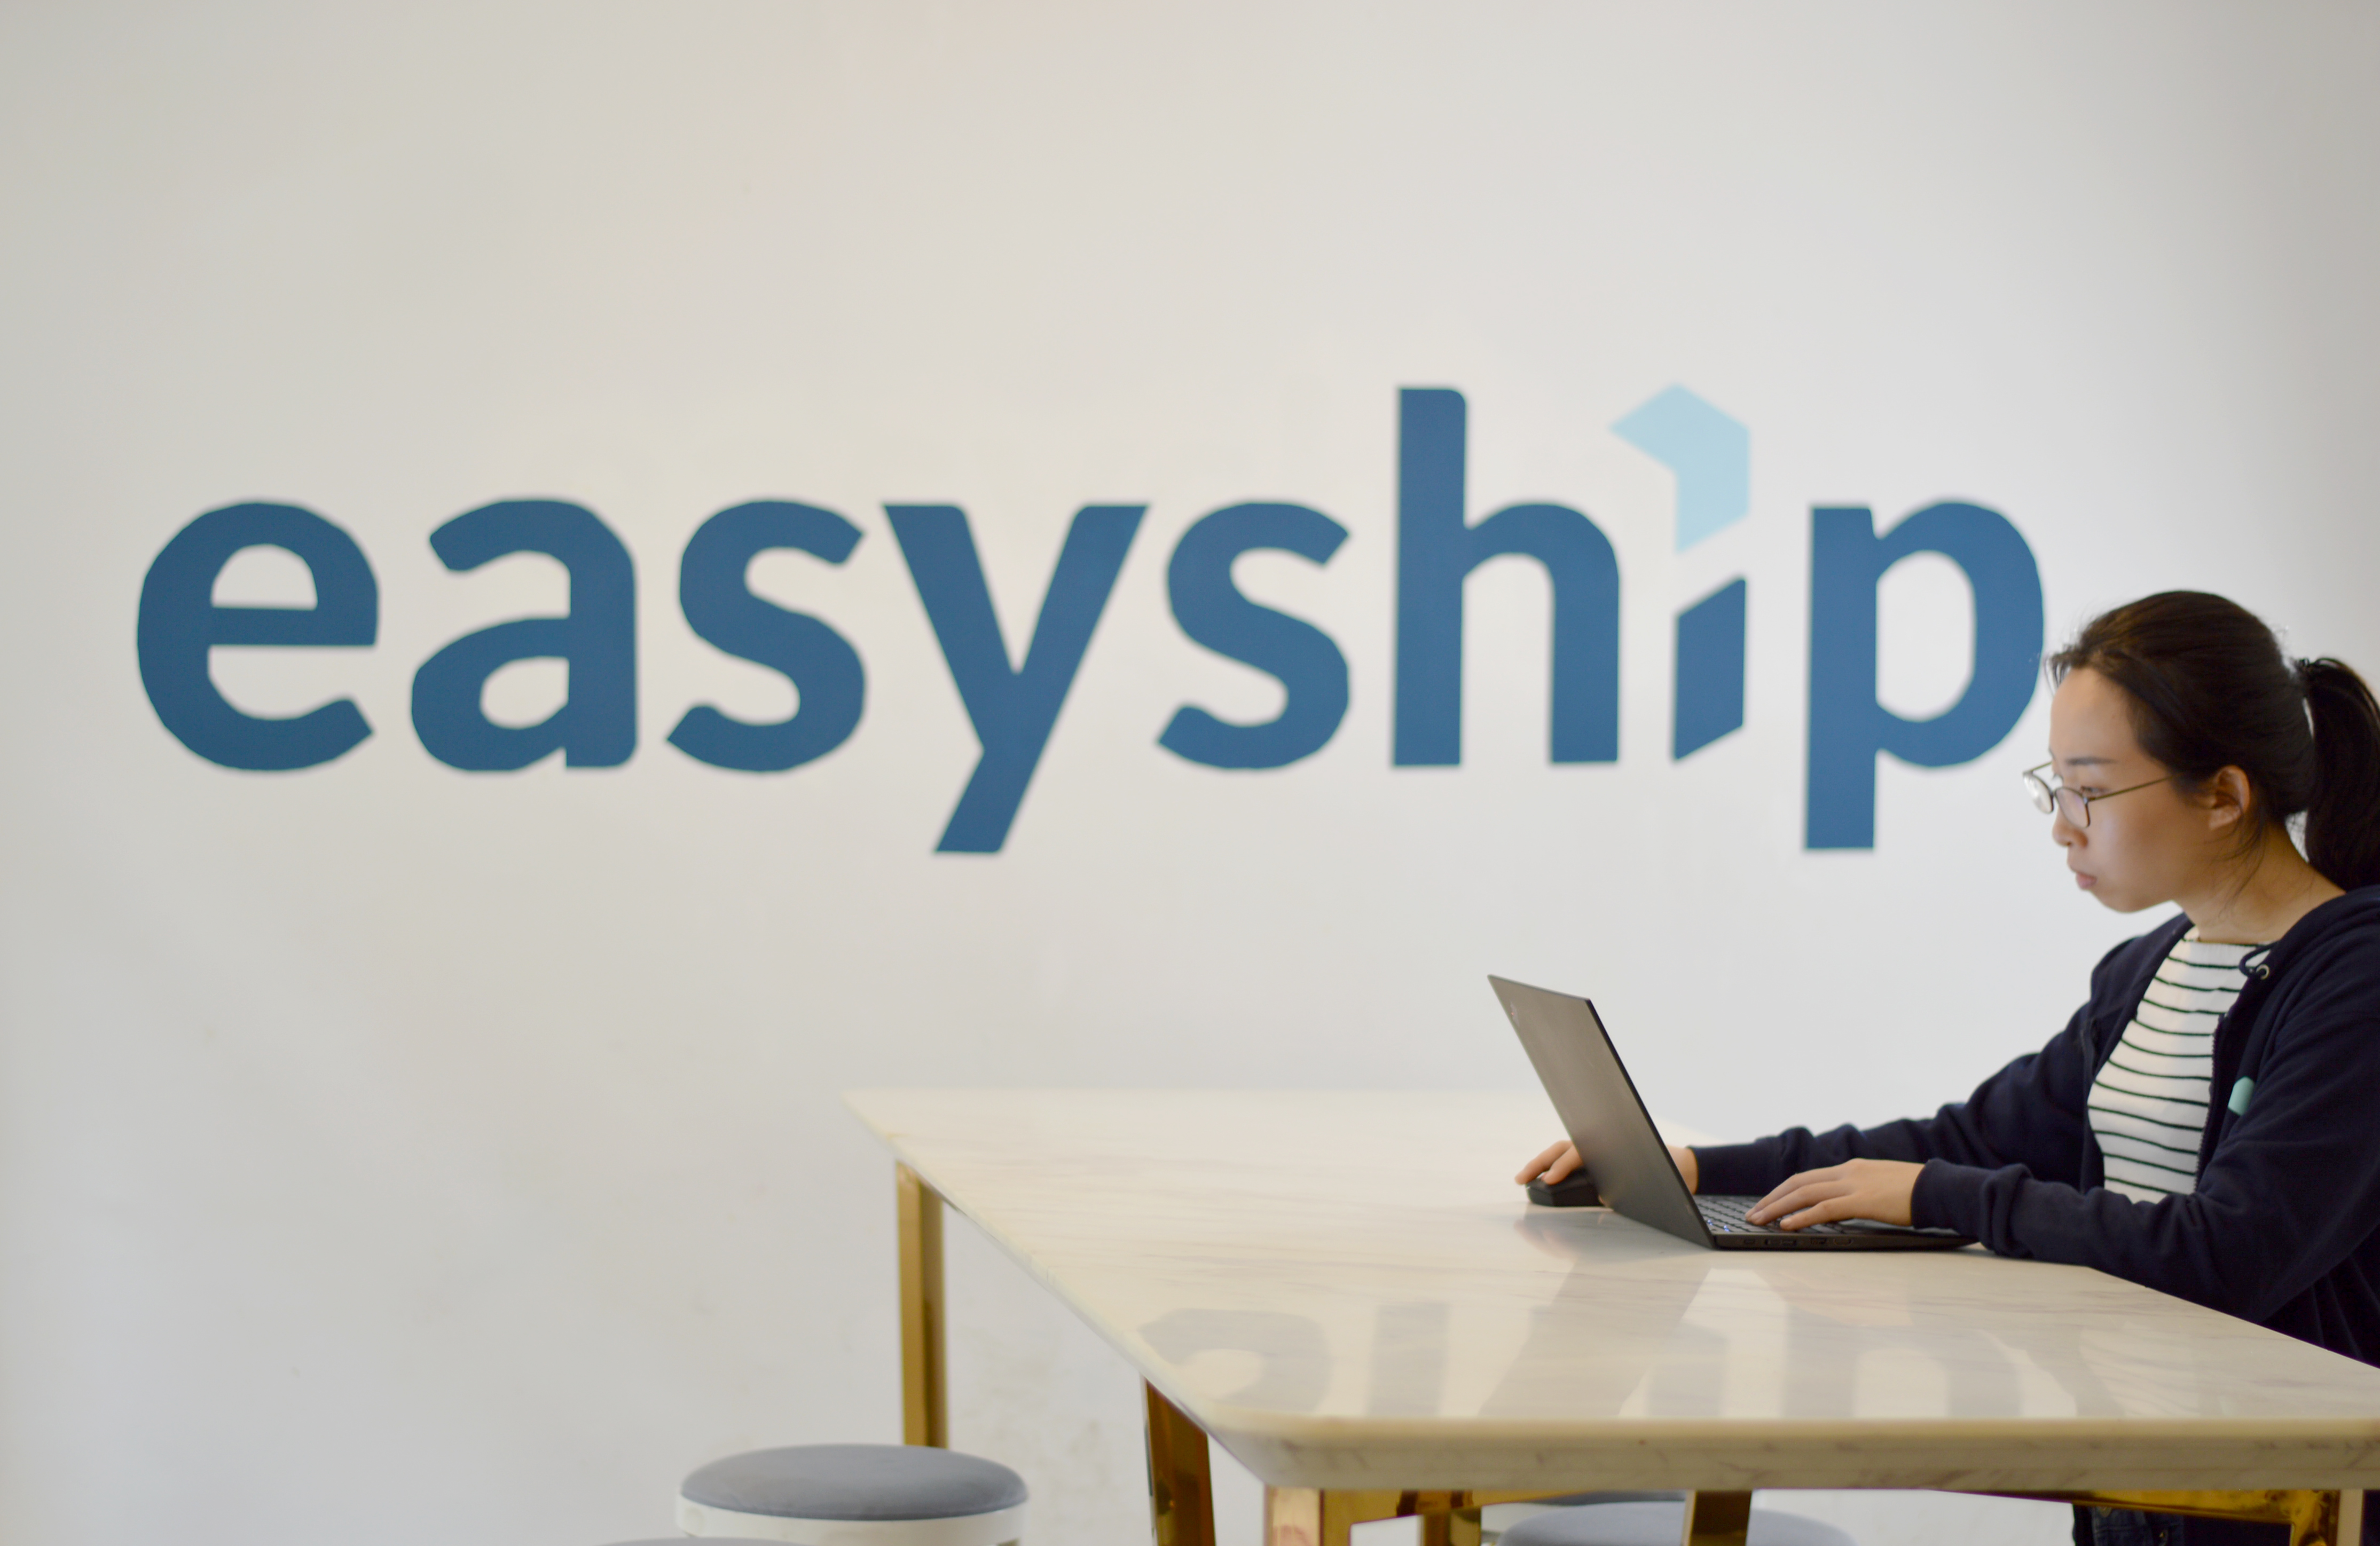 Easyship raises $4m Series A to expand shipping network and supply chain